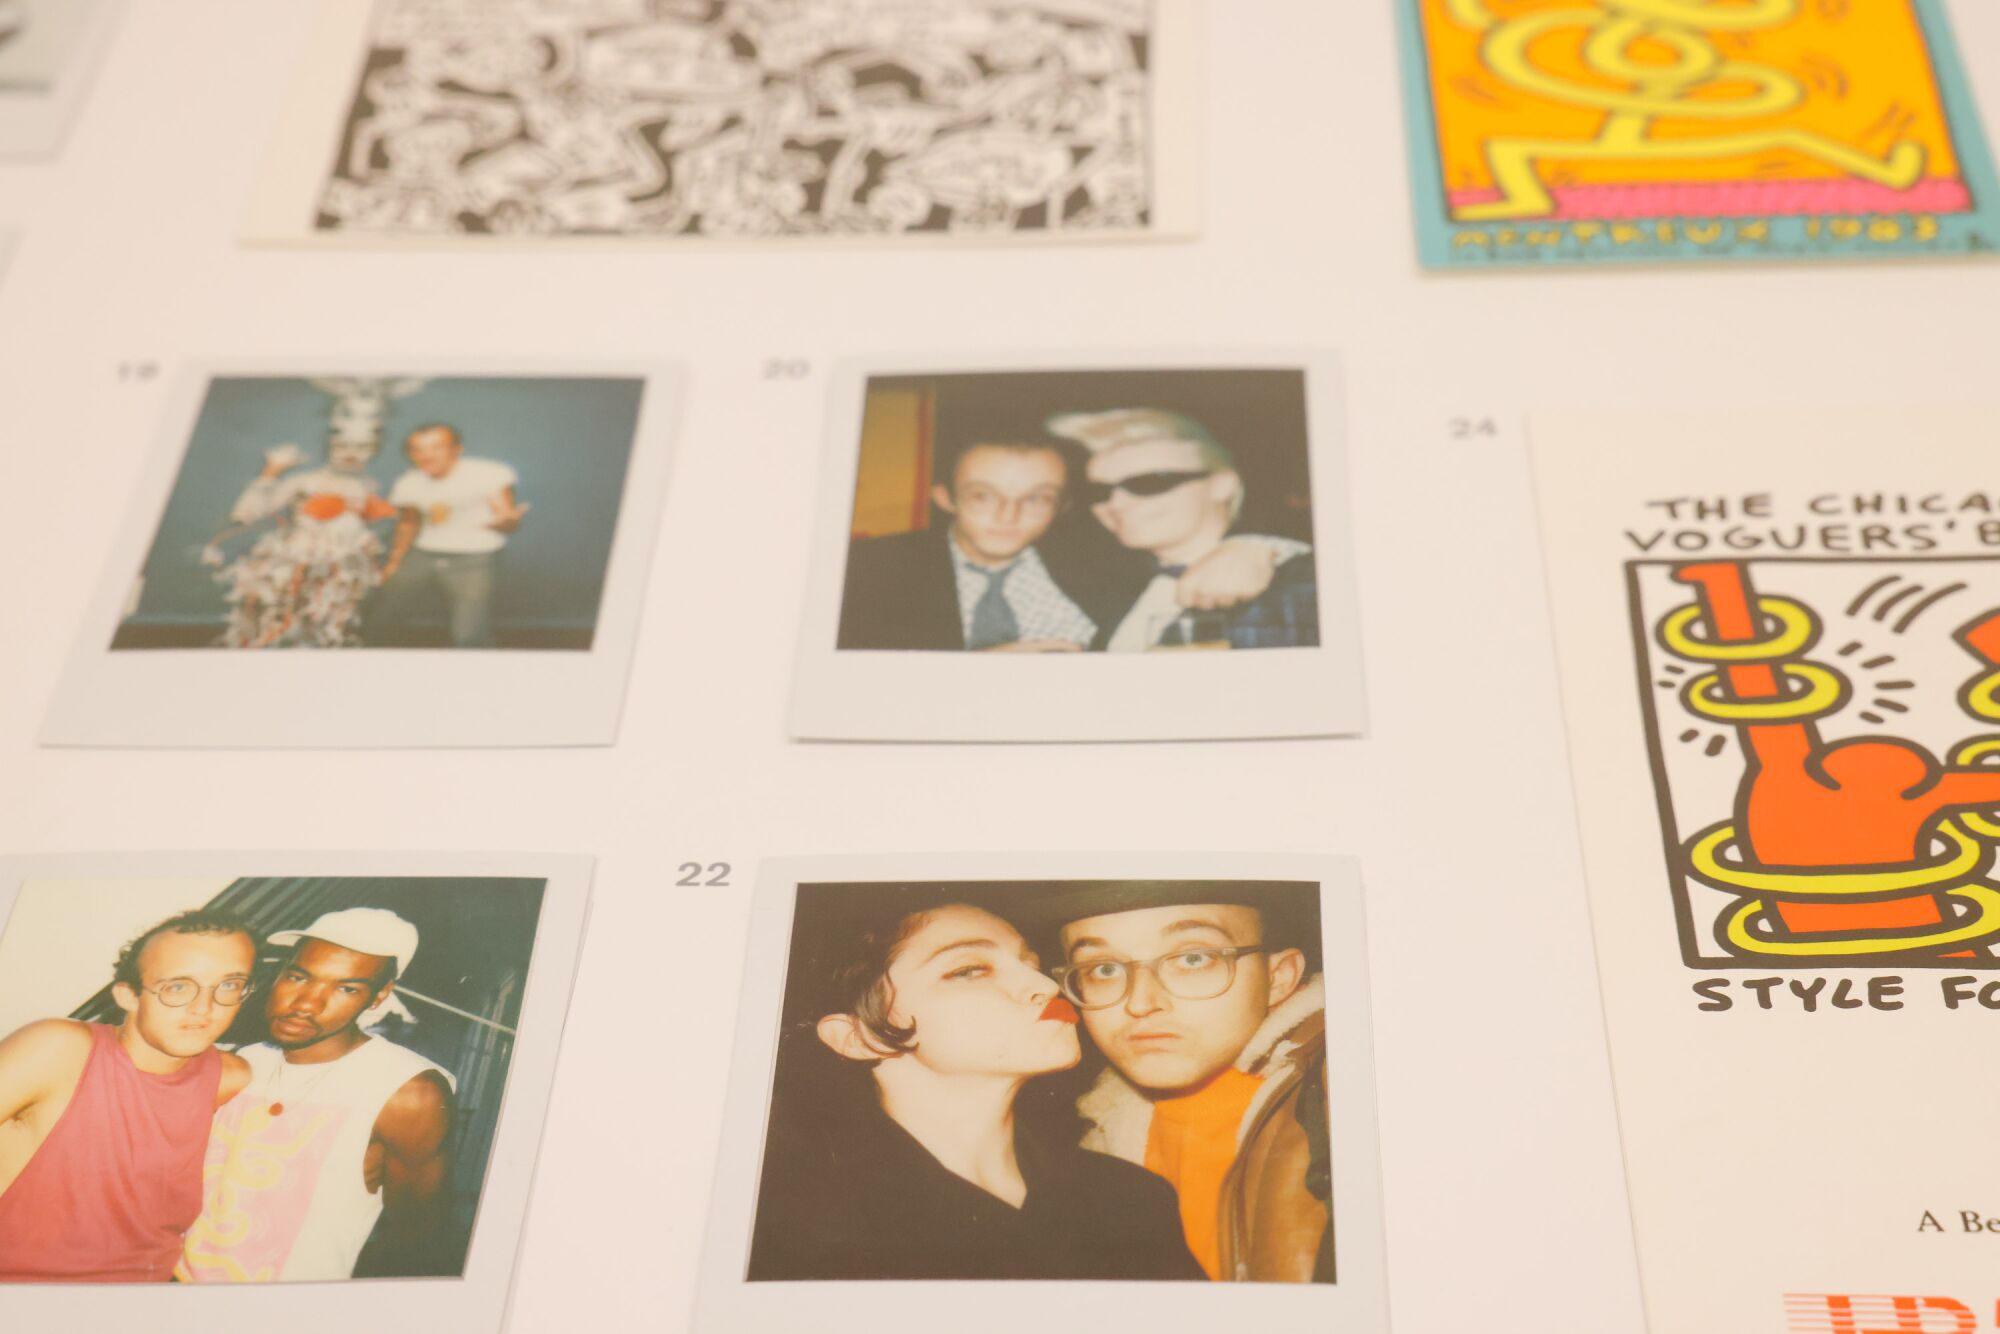 Snapshots including one of Madonna with Keith Haring.